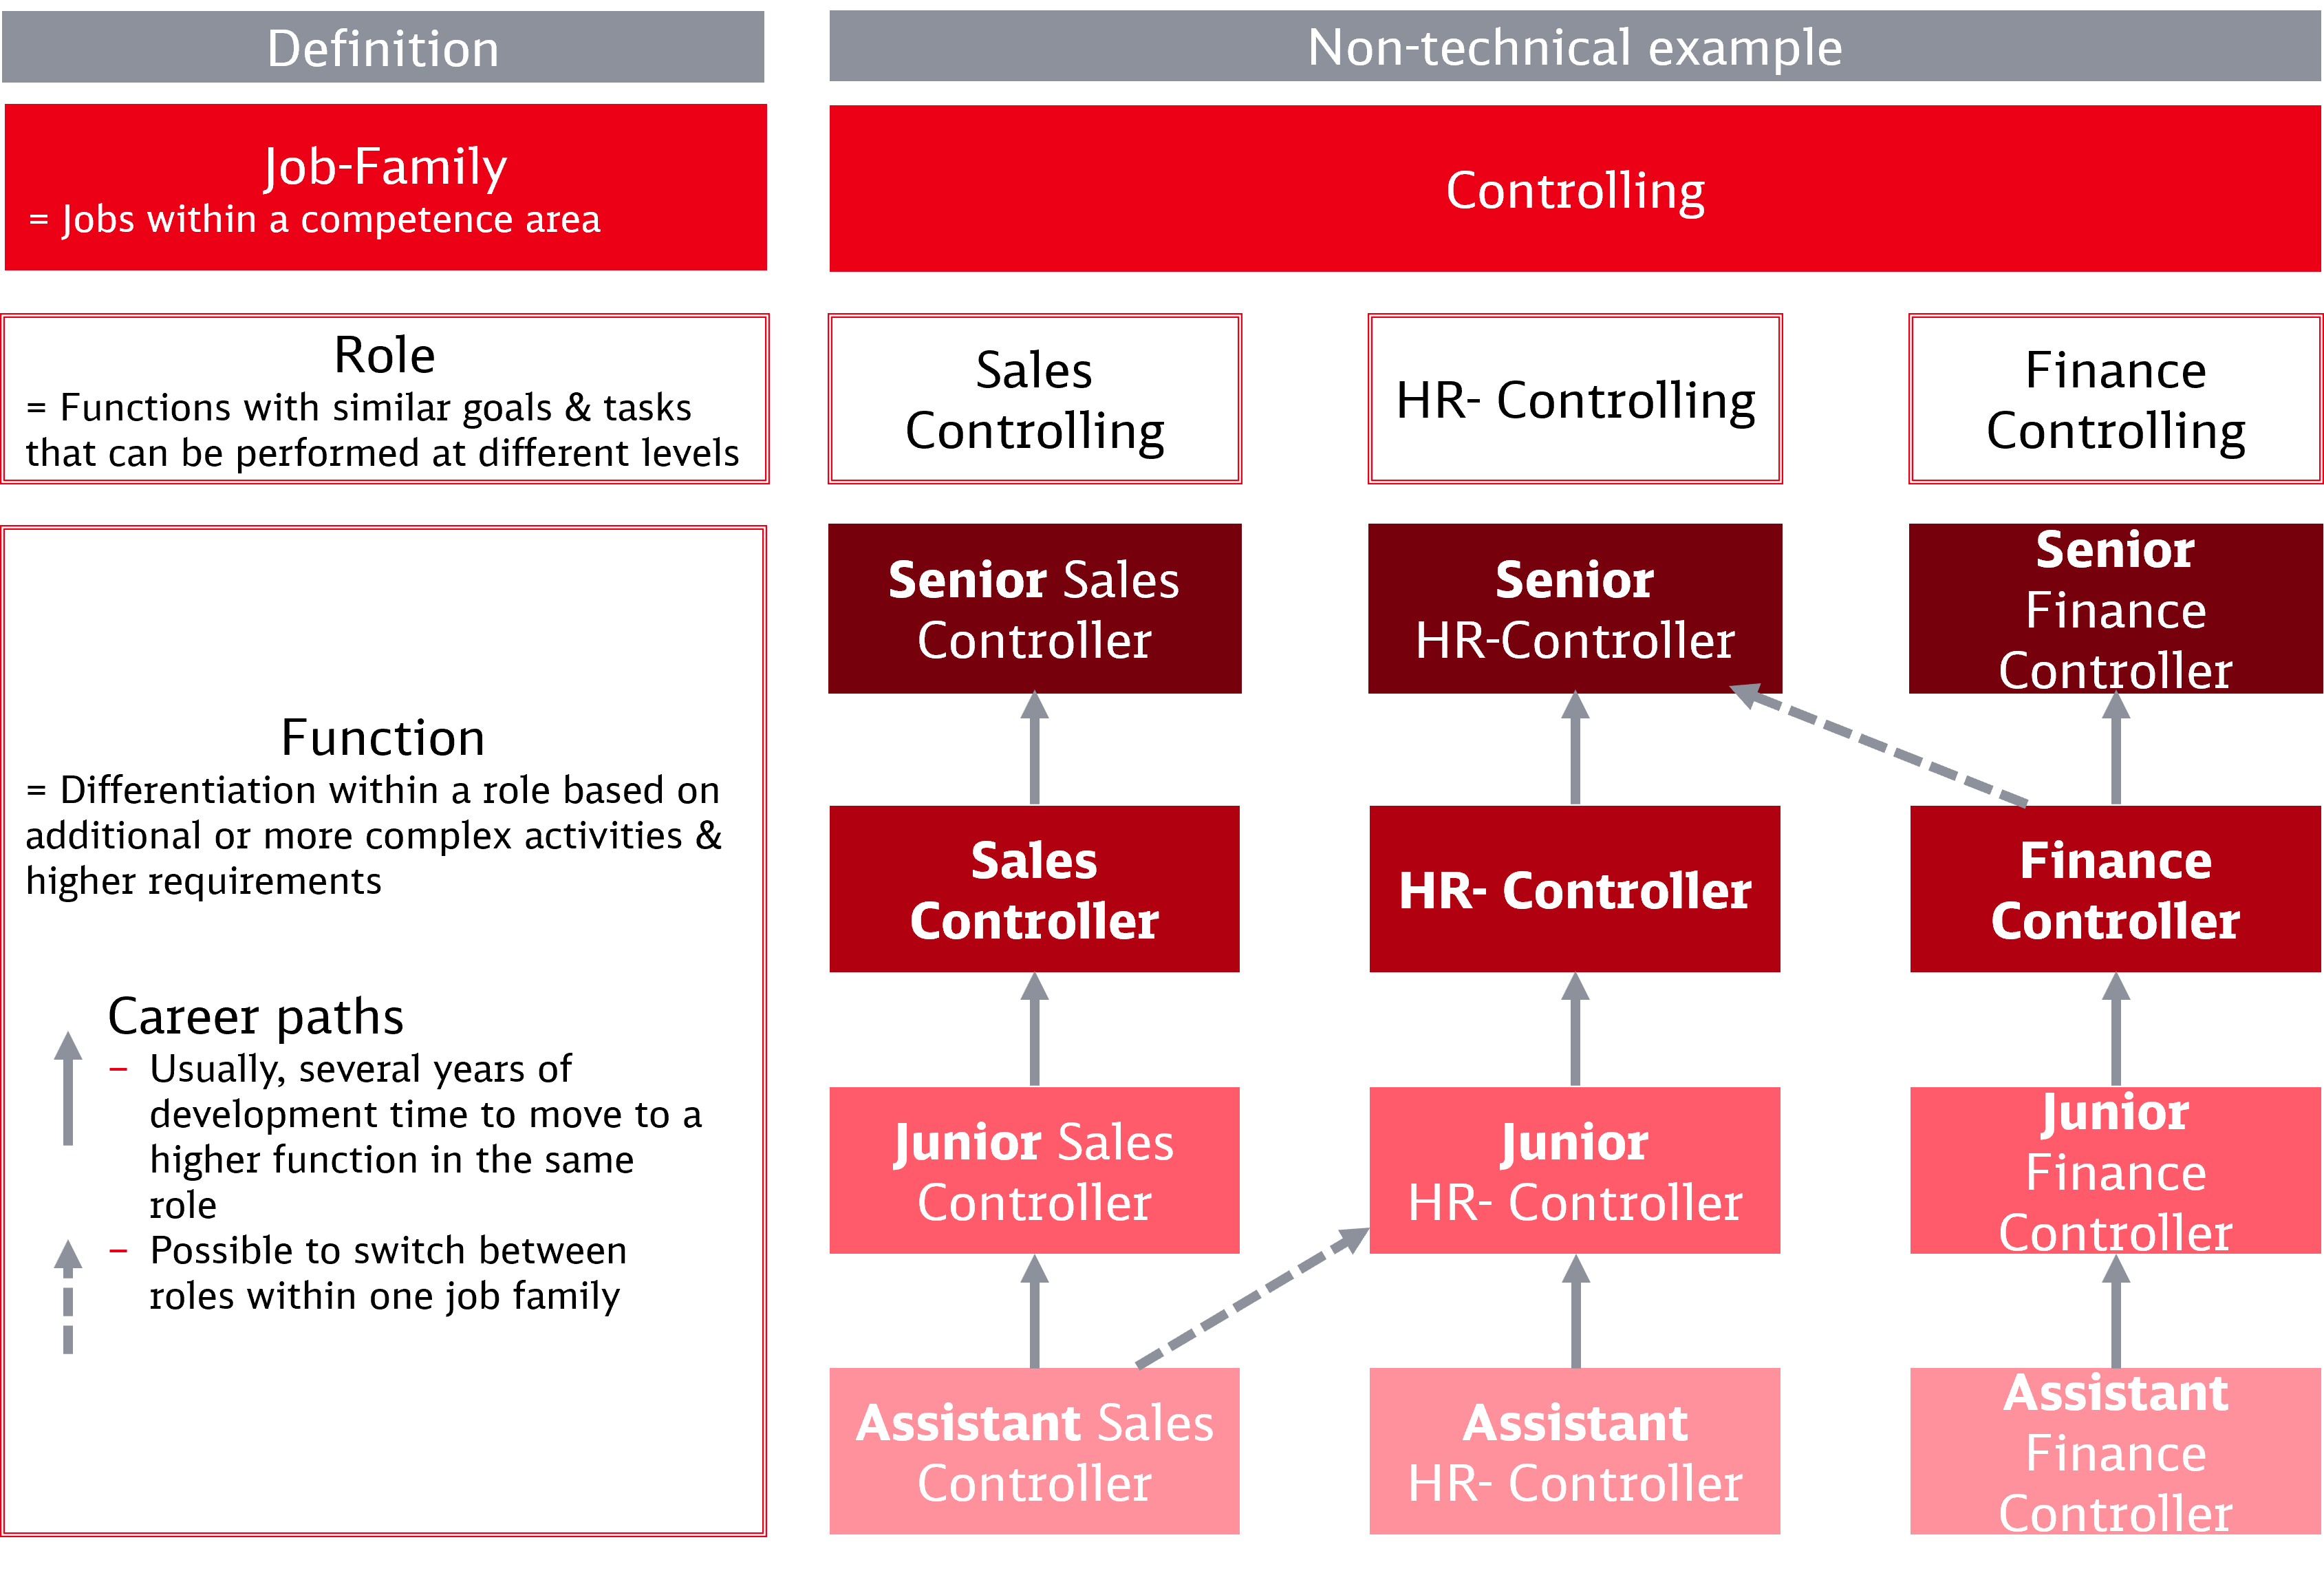 Example for career paths in a non-technical job family